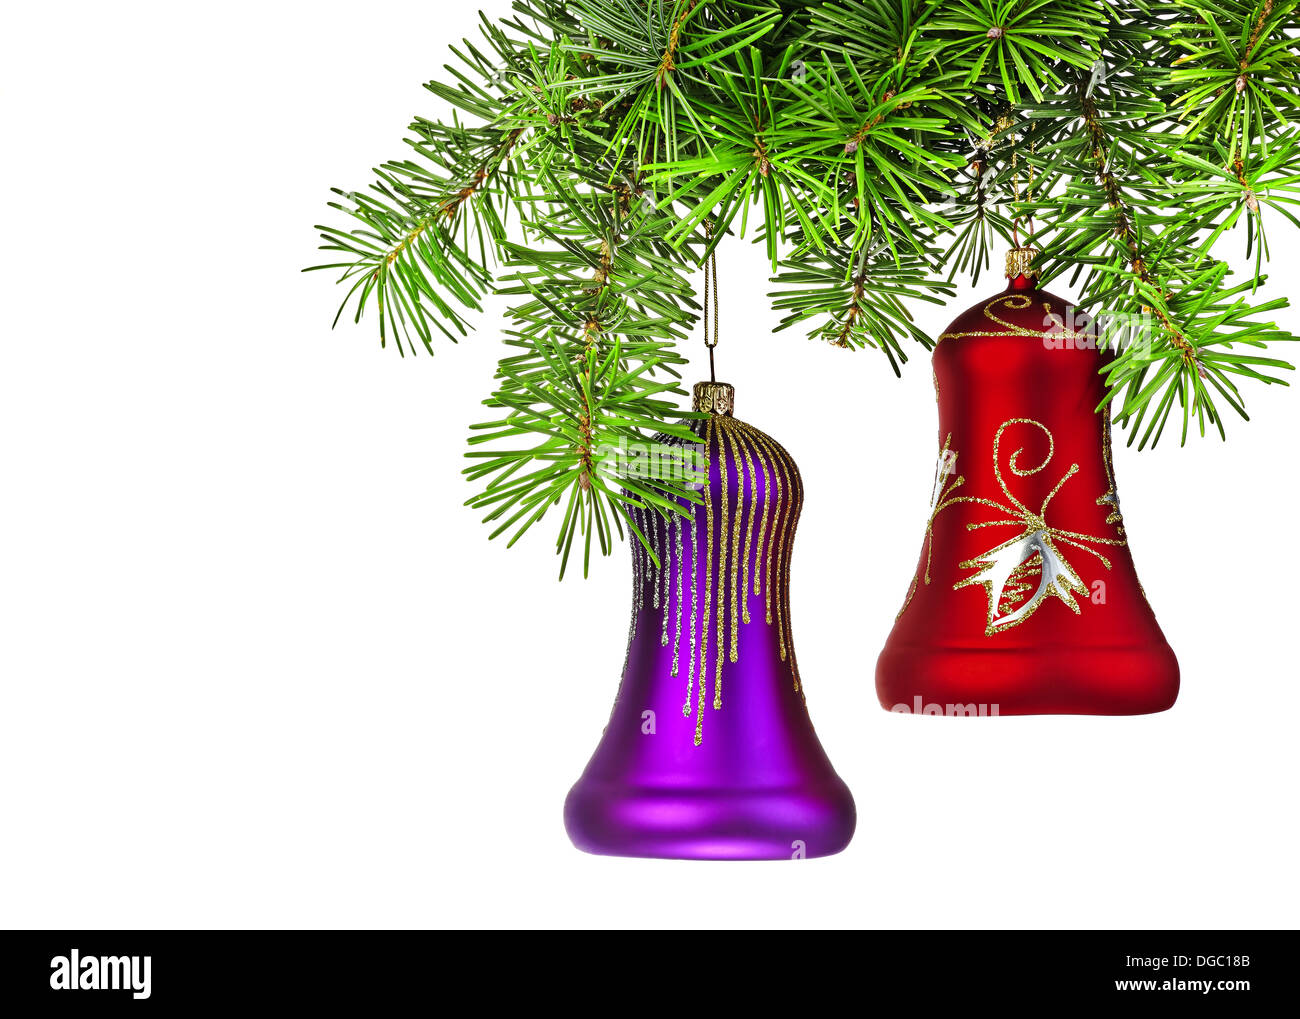 Christmas violet and red bells on new year tree Stock Photo